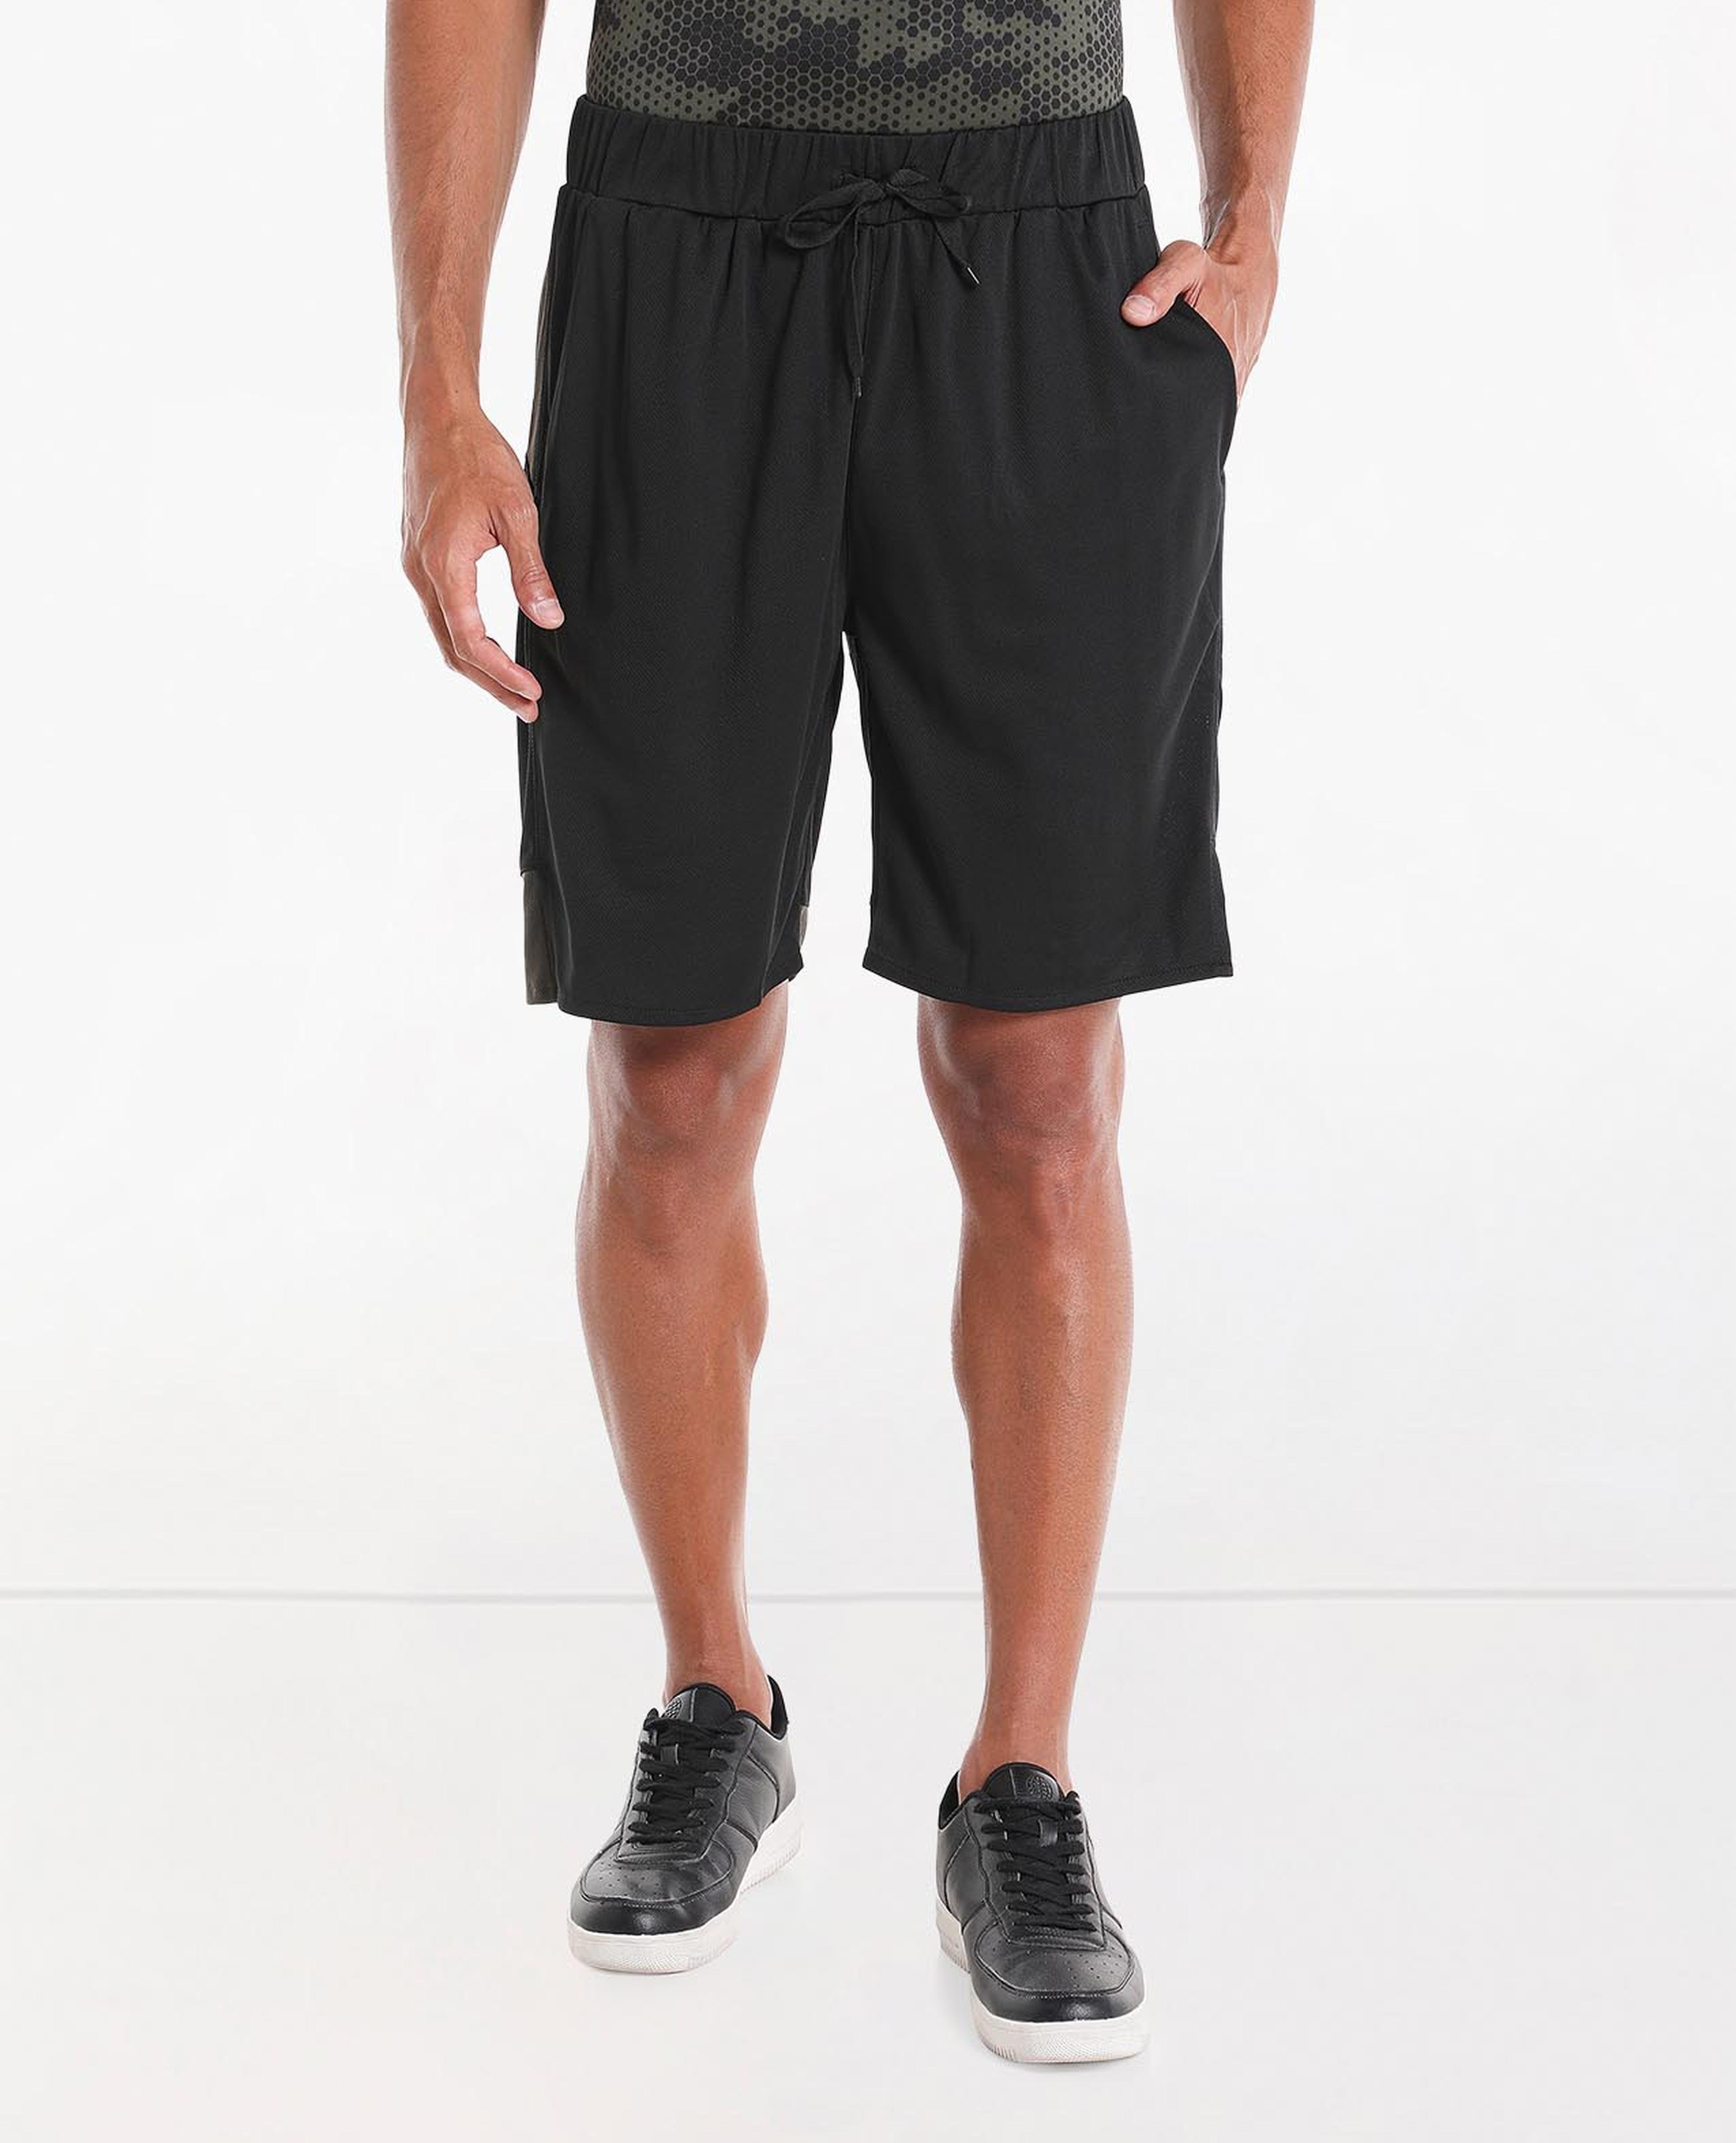 Solid Track Pants with Elasticated Drawstring Waist